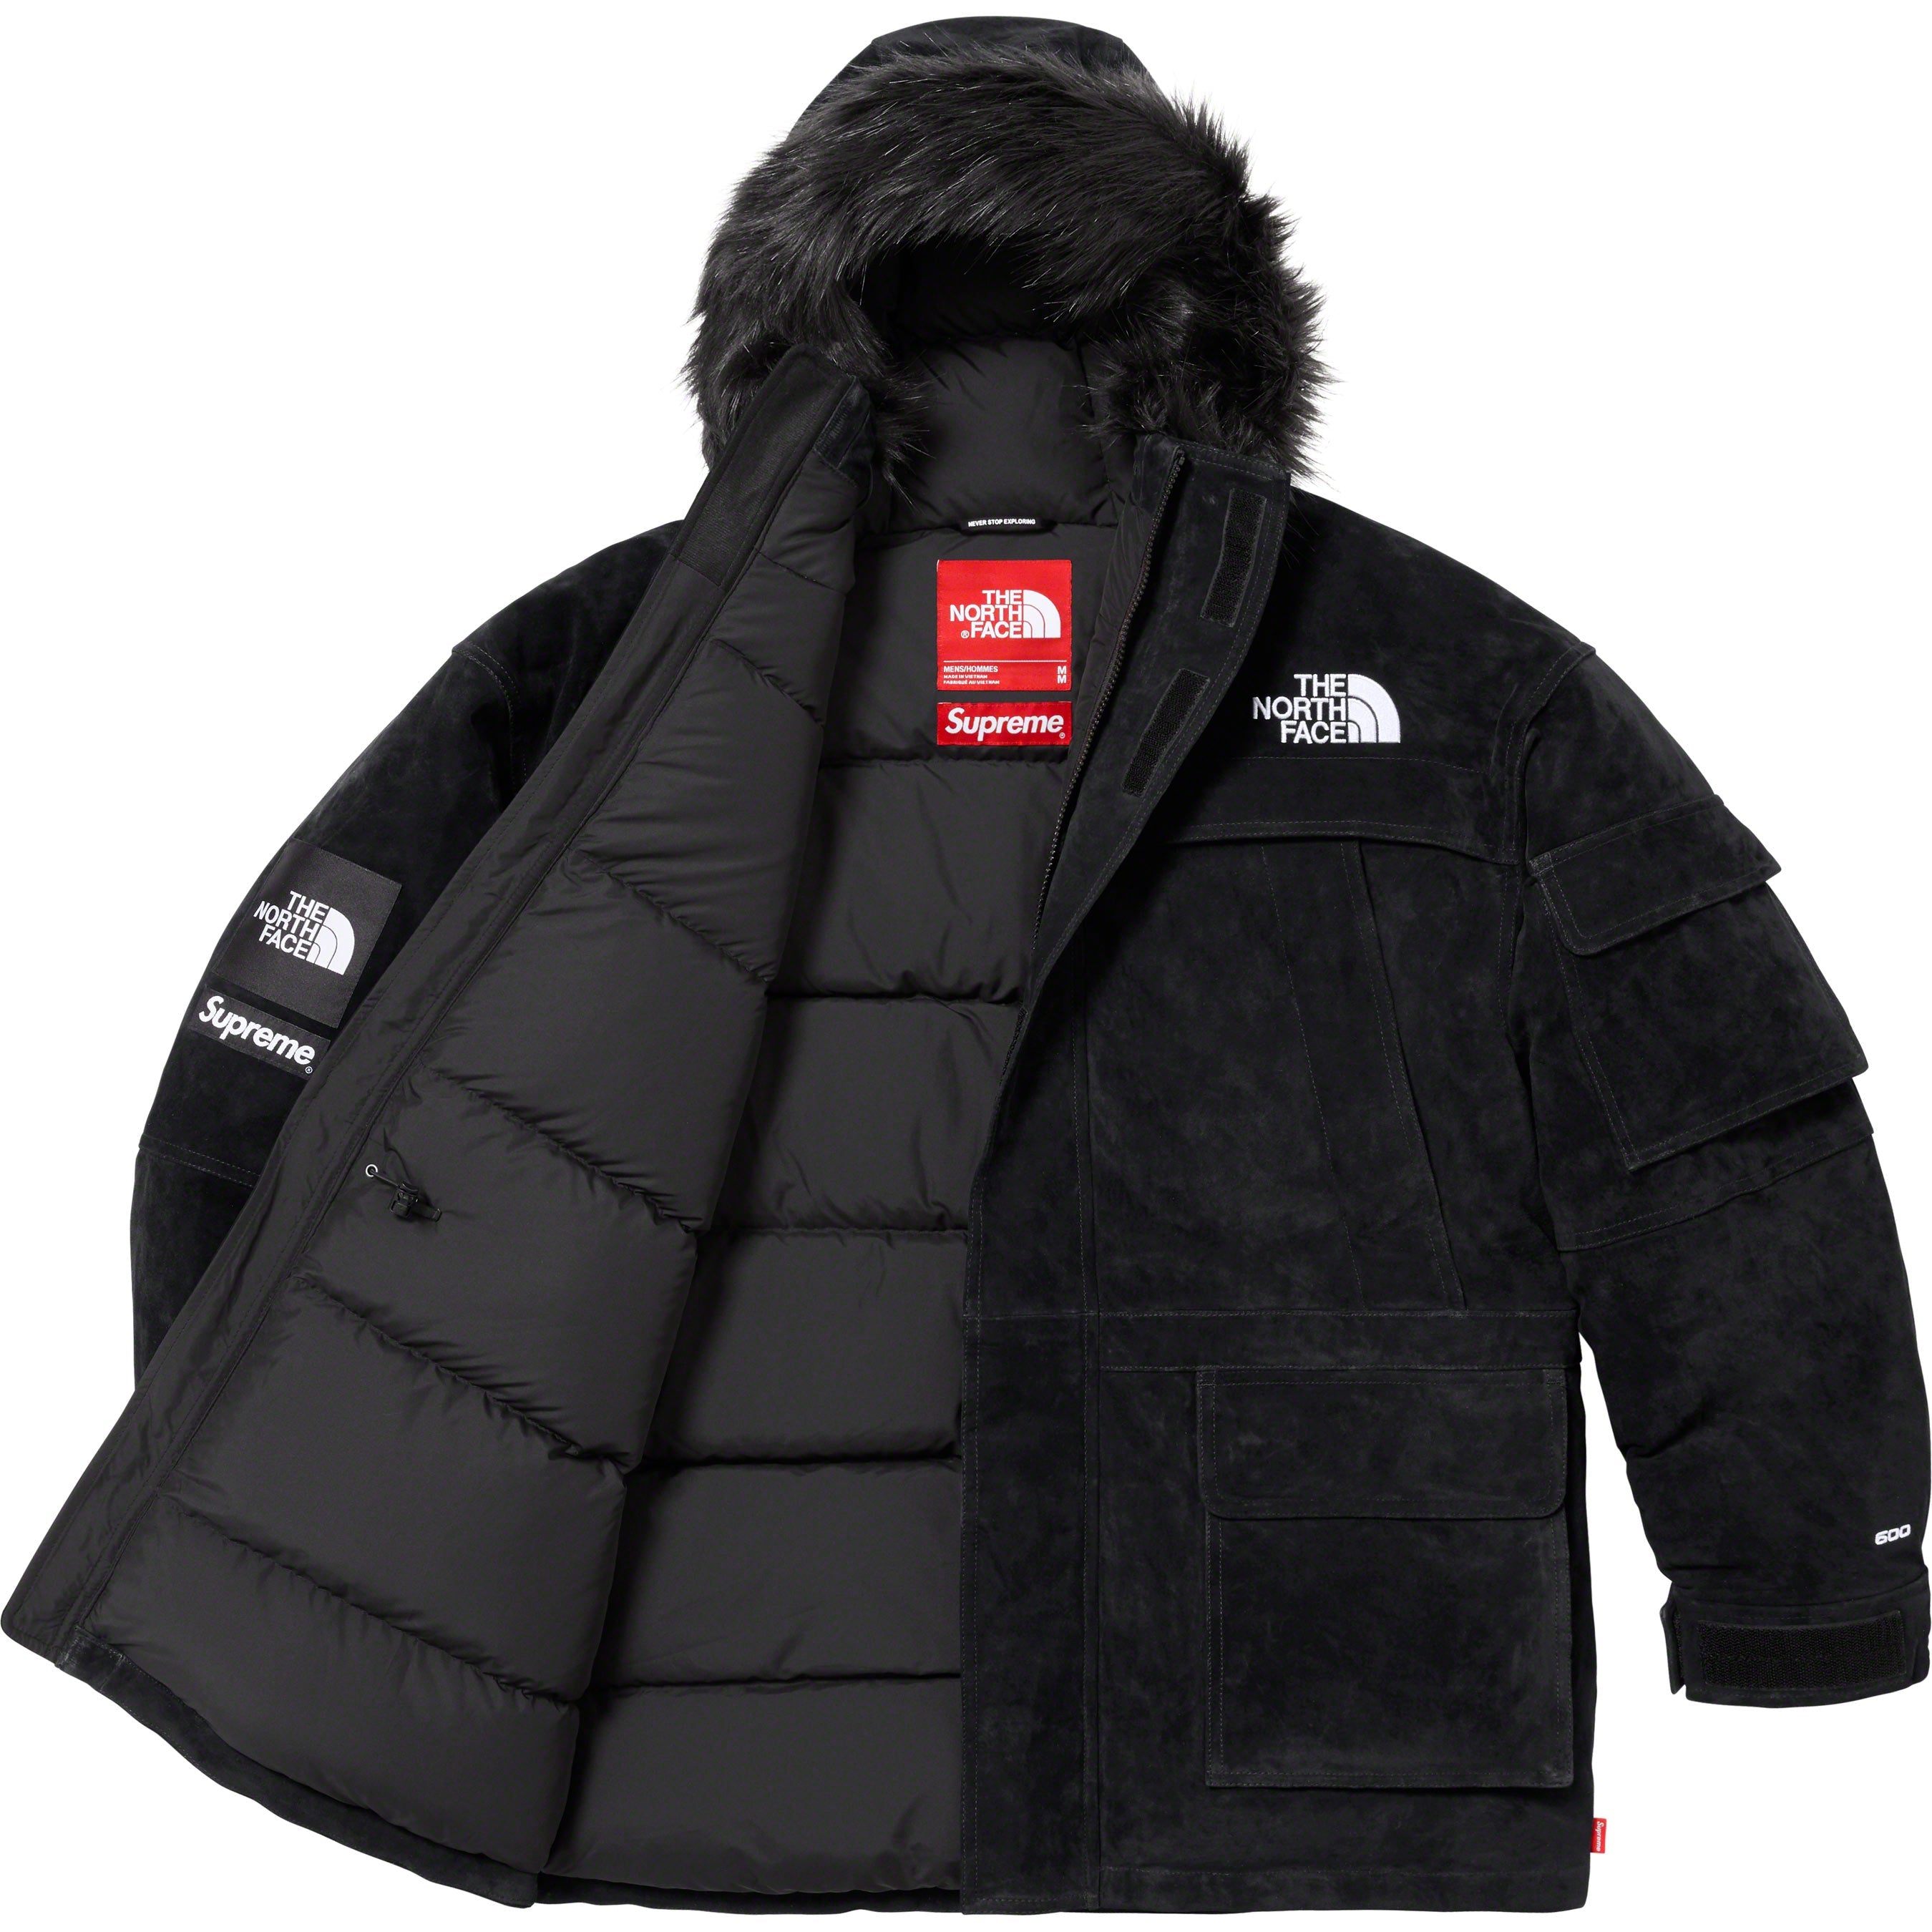 The Latest Supreme x The North Face Drop Is Full of Sick Suede